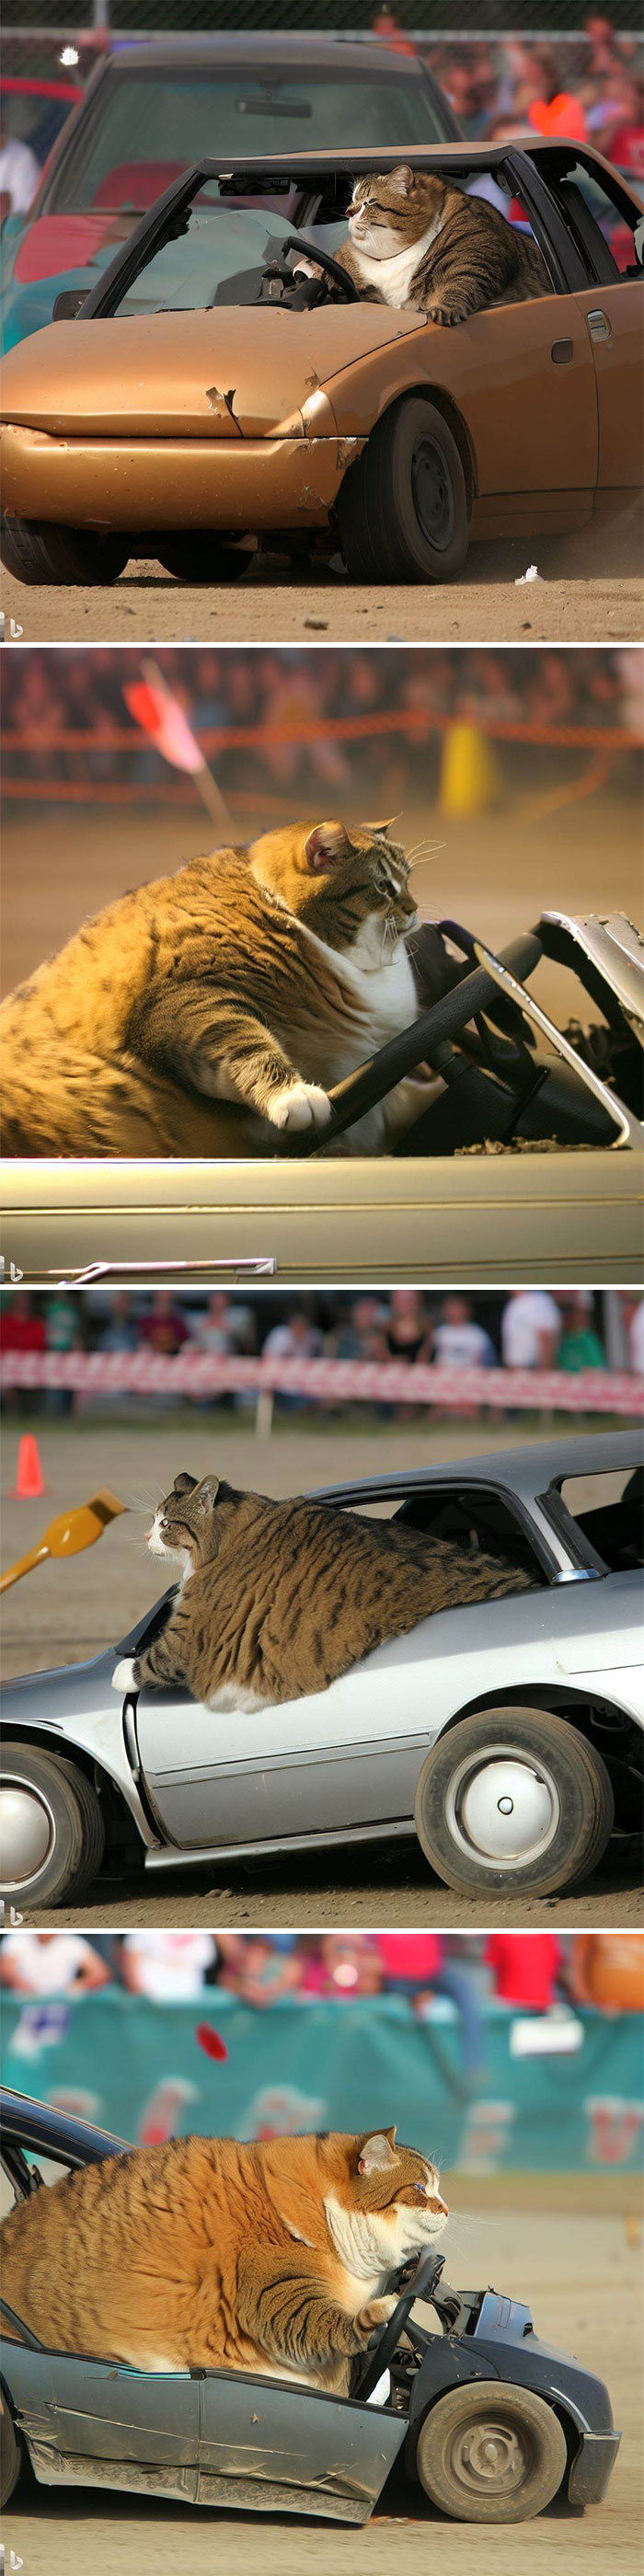 Extremely Fat Cat Driving A Honda Civic At A Demolition Derby